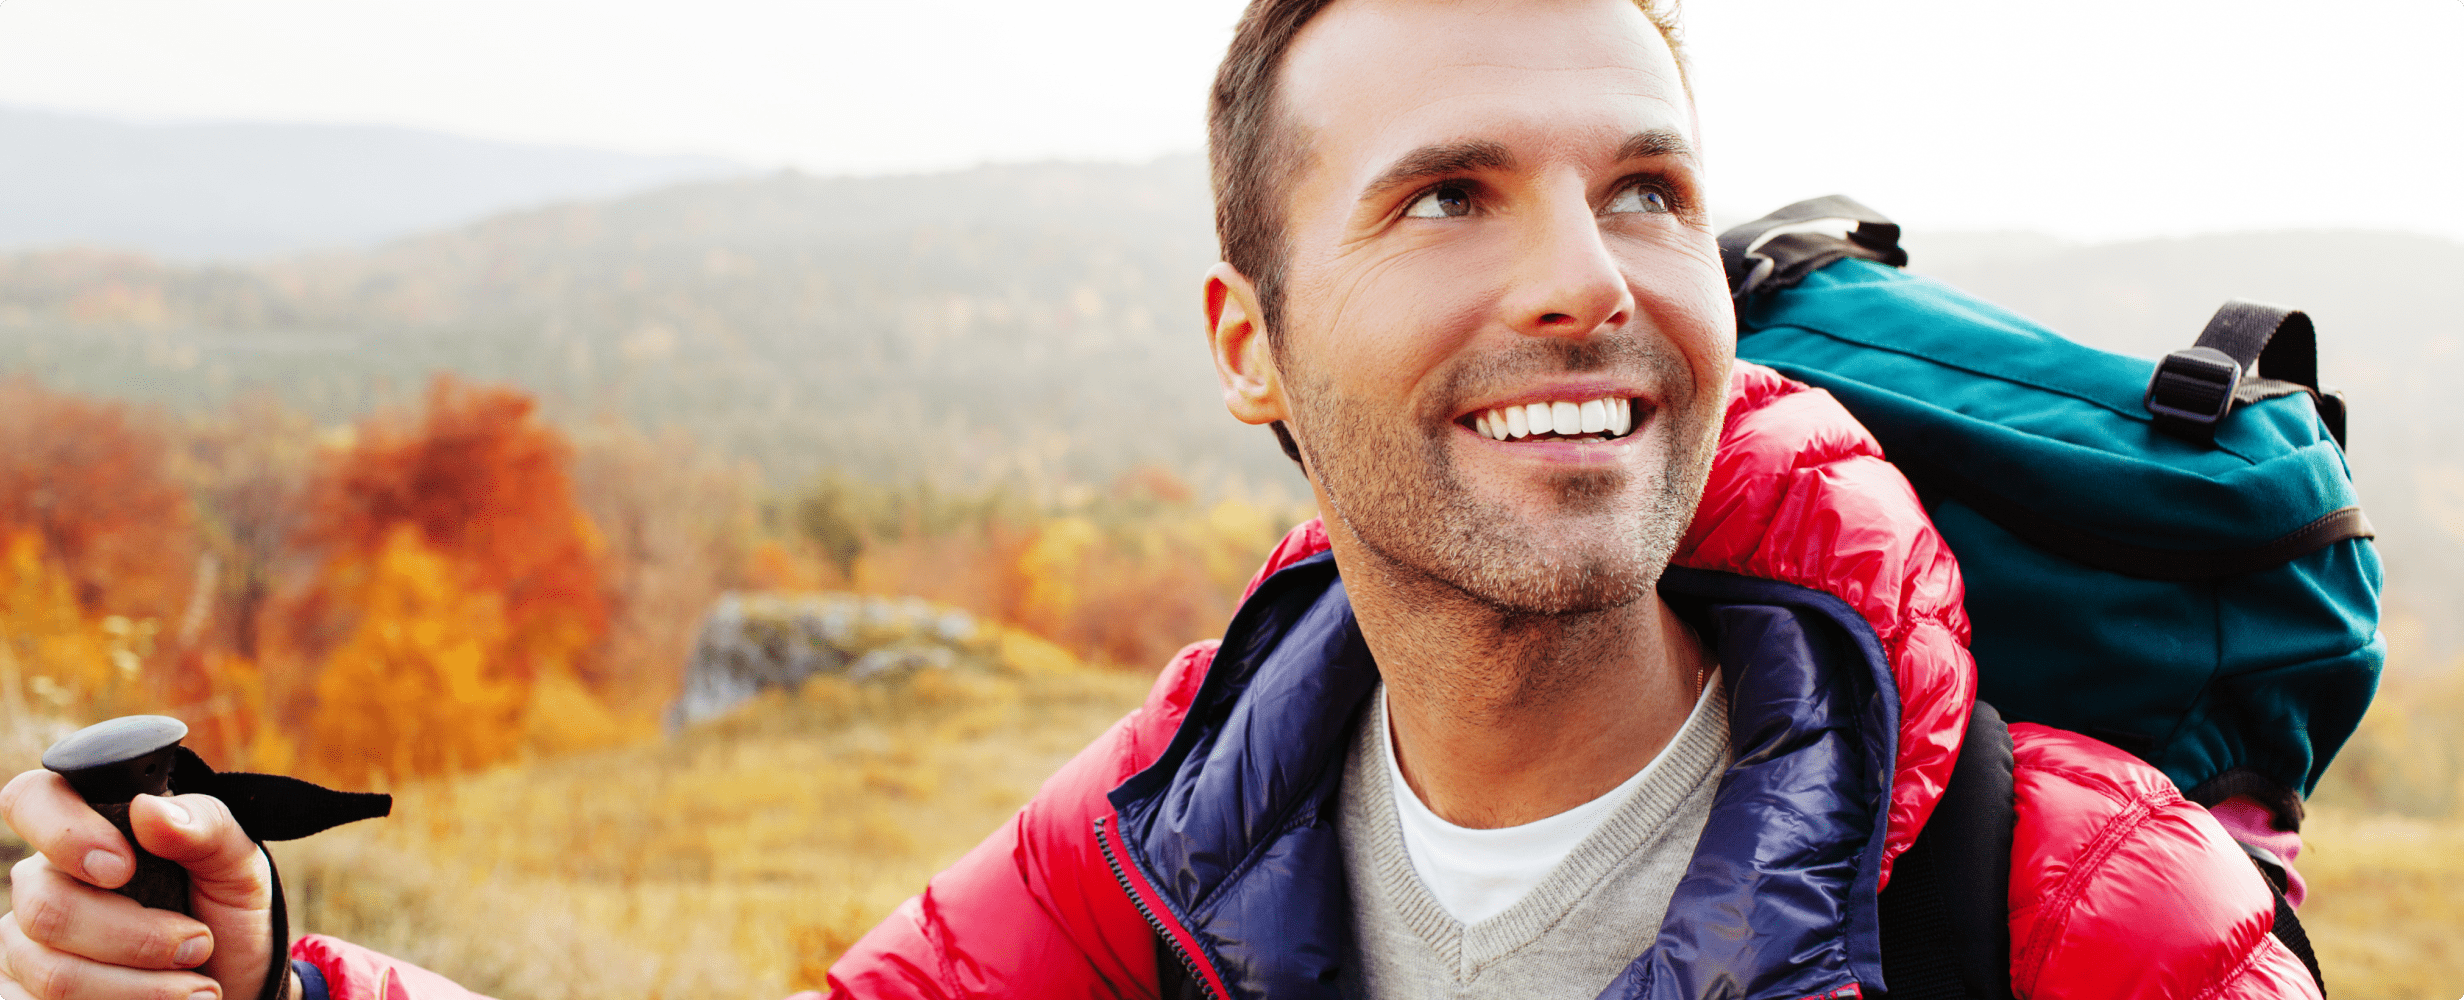 Middle-aged man hiking in the mountains wearing Go over the counter hearing aids.